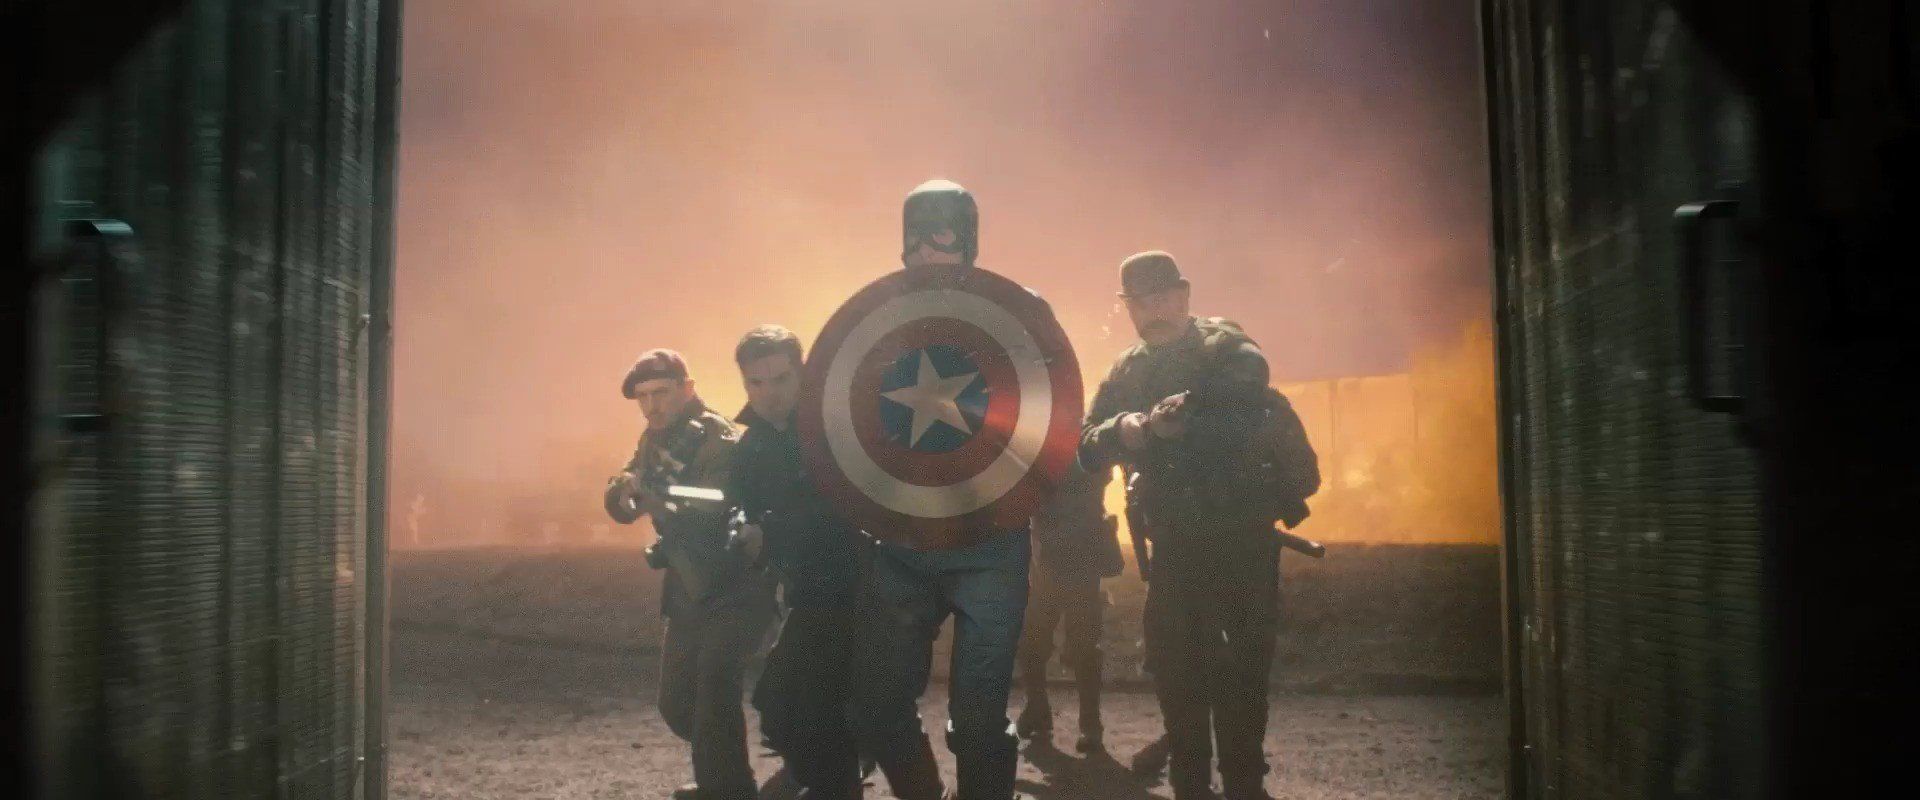 captain america entering a building with his shield in front him and soldiers behind him